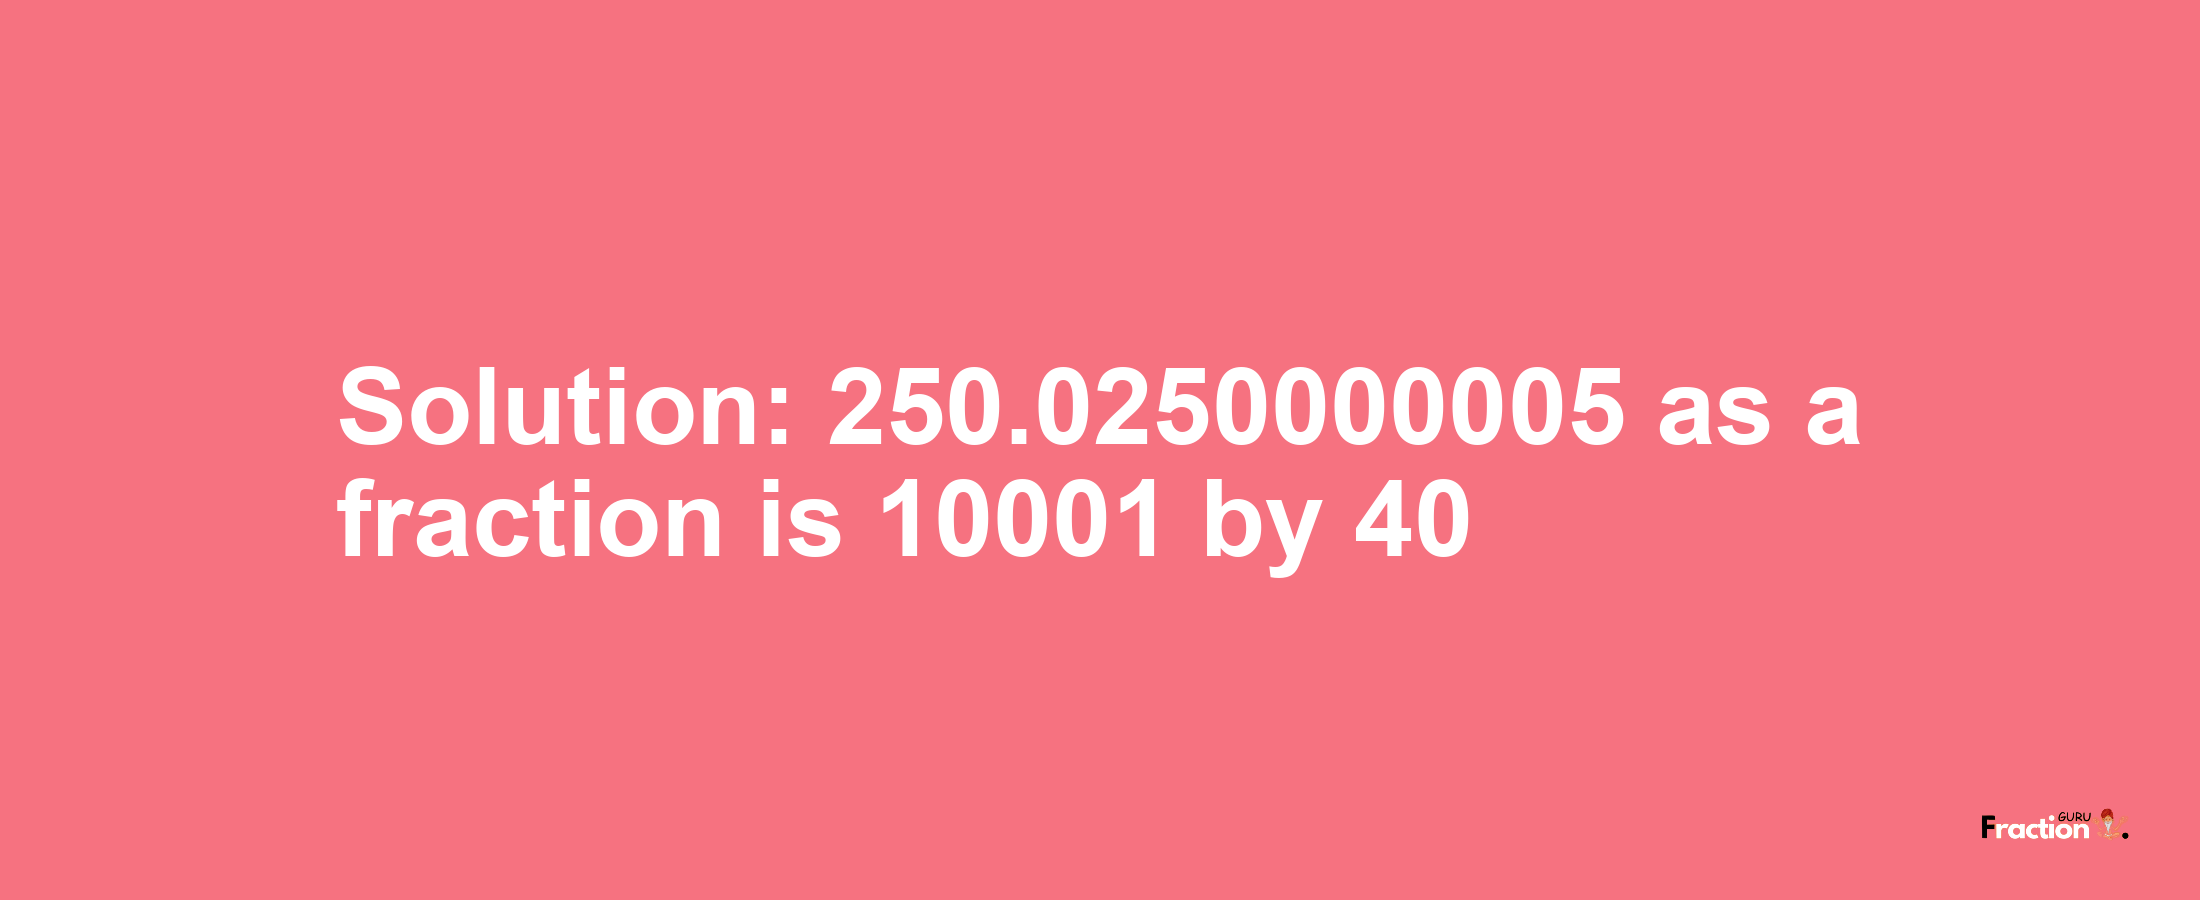 Solution:250.0250000005 as a fraction is 10001/40